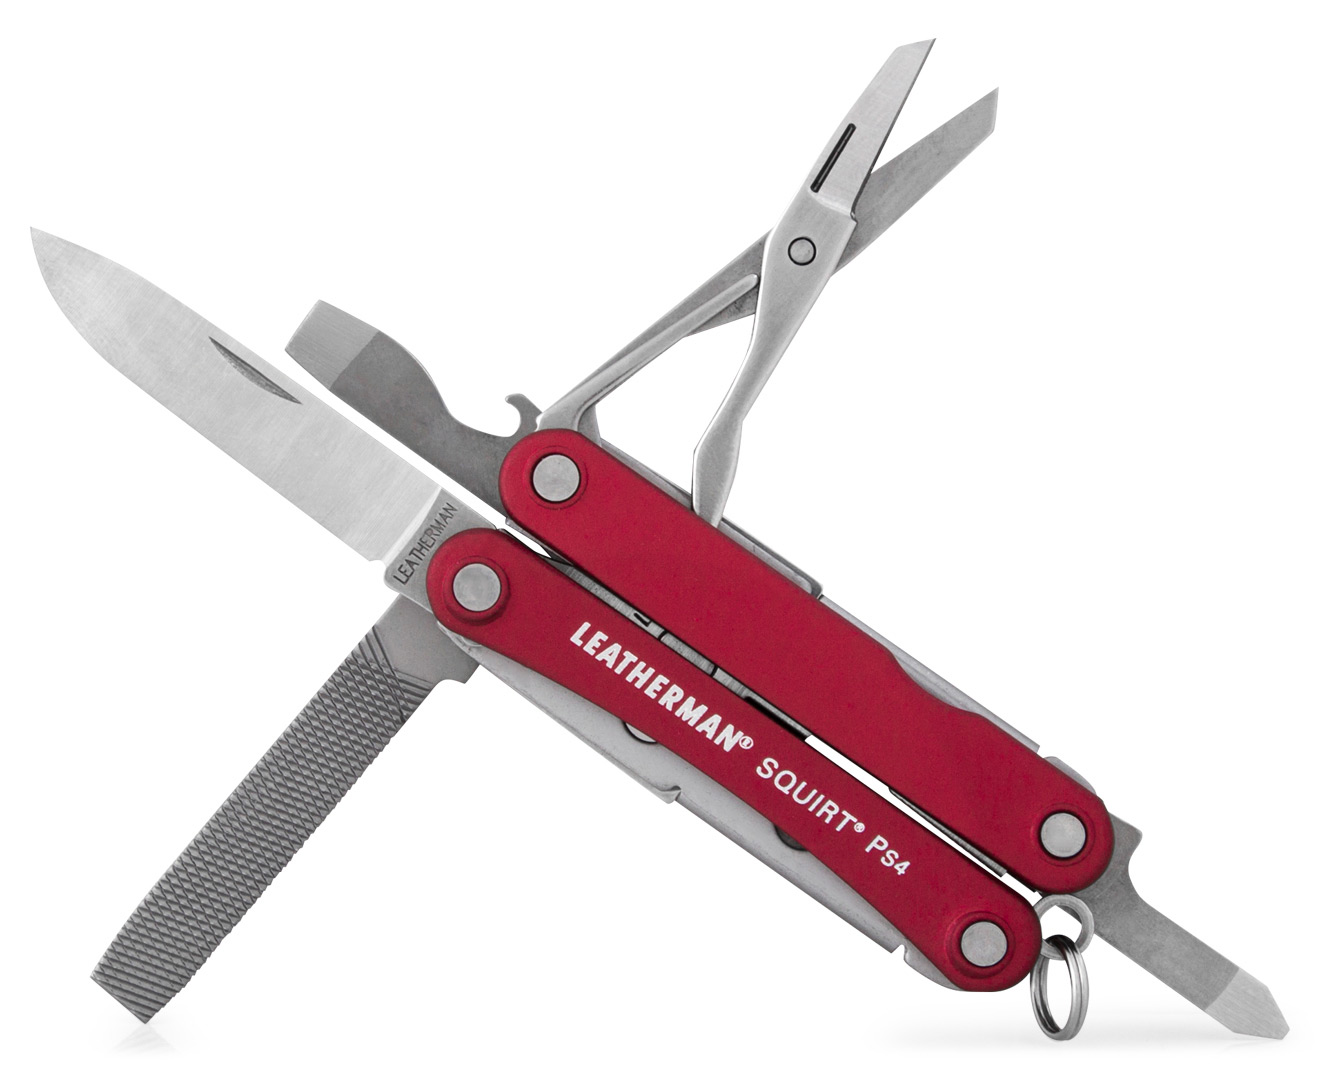 Leatherman Squirt PS4 Multi-Tool - Red | Catch.com.au